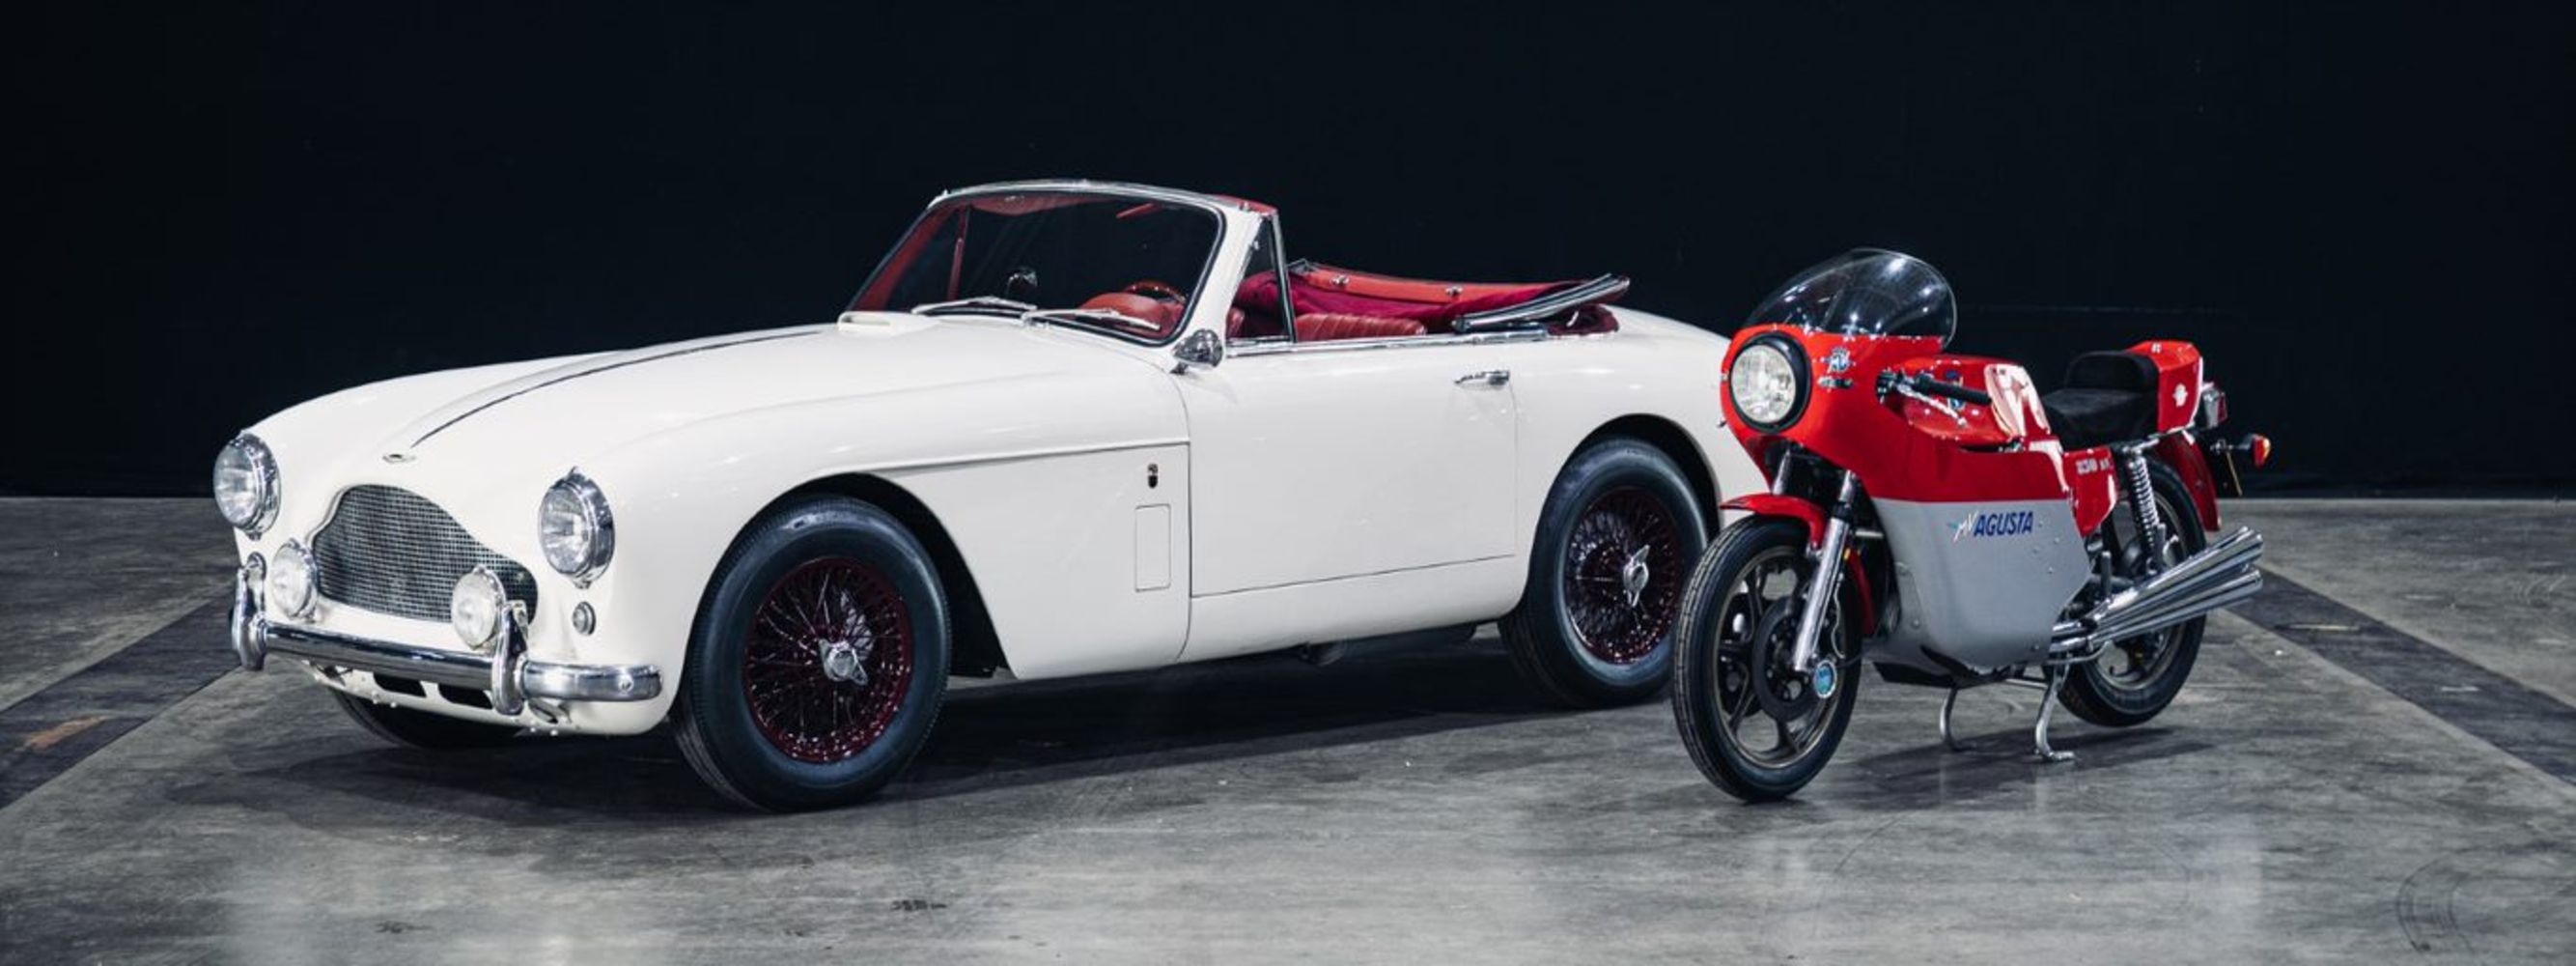 The May Sale 2021 - Classic Cars And Classic Motorcycles